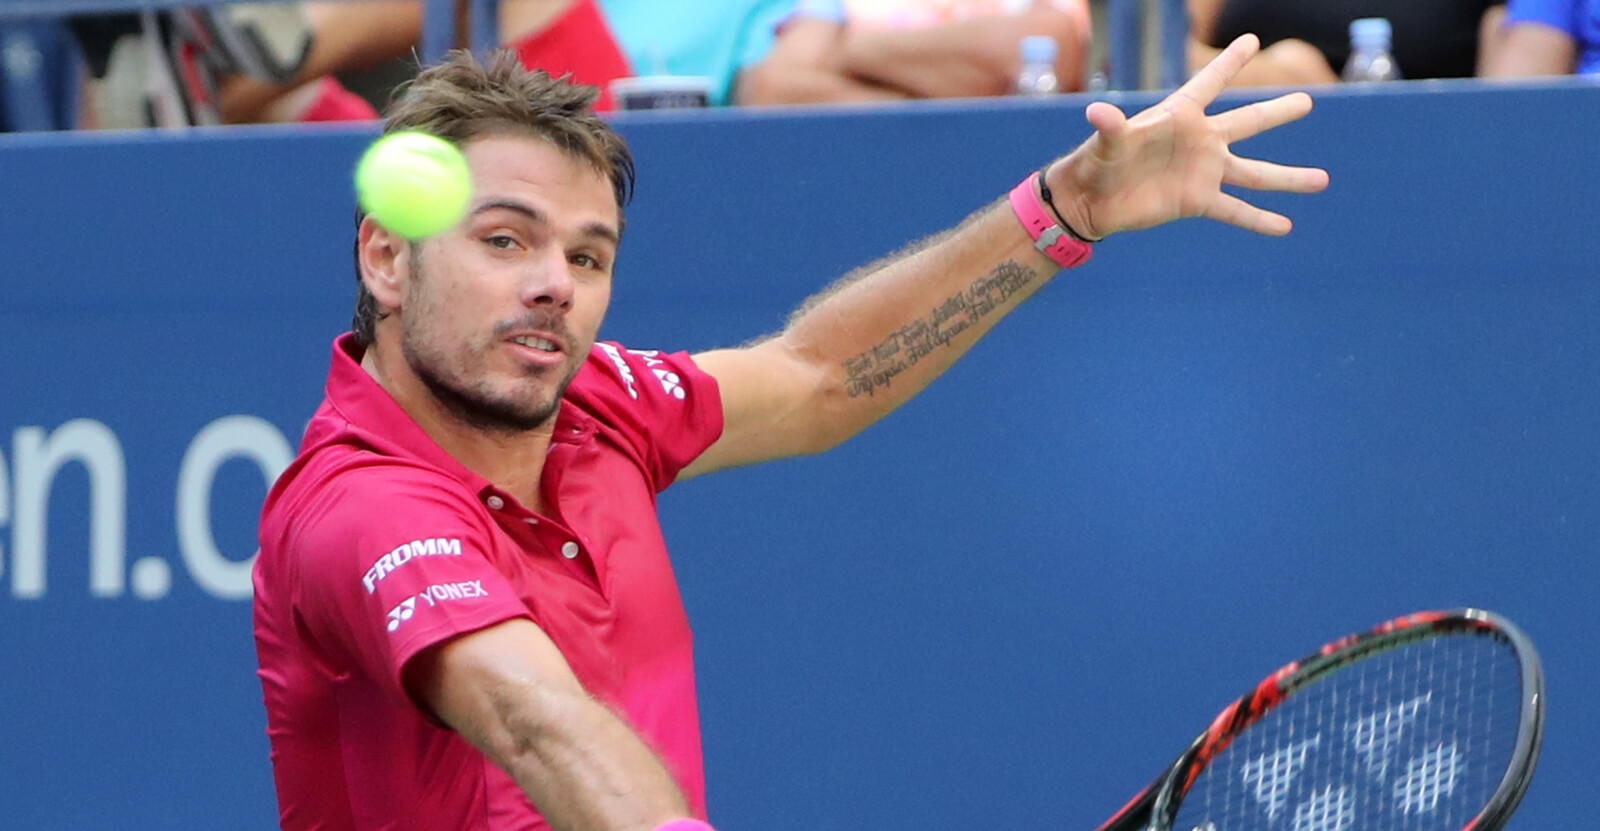 Stan Wawrinka is one of the world's greatest tennis players